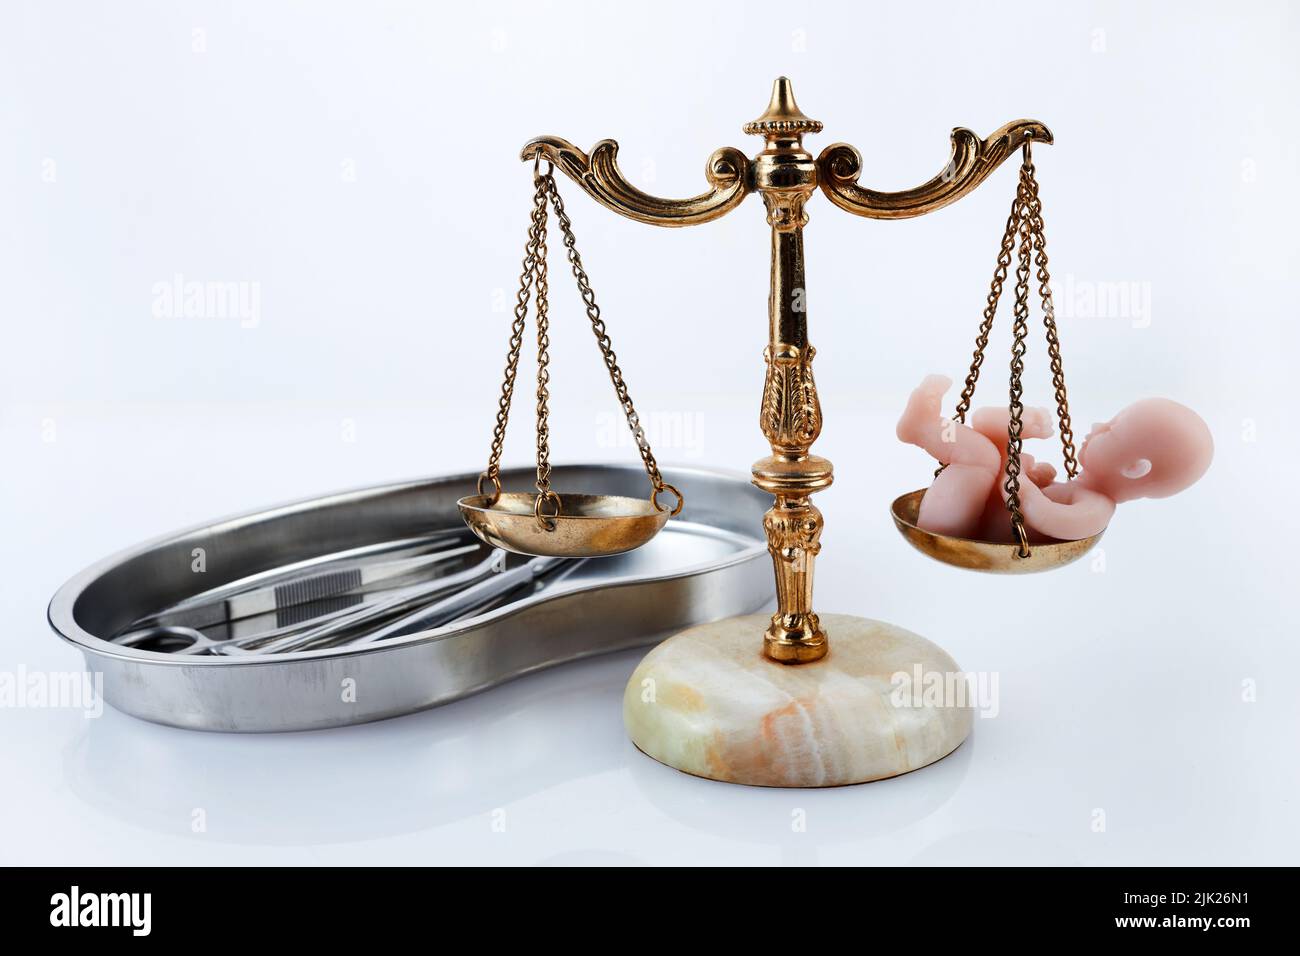 Reproduction laws and abortion or fetus rights Stock Photo